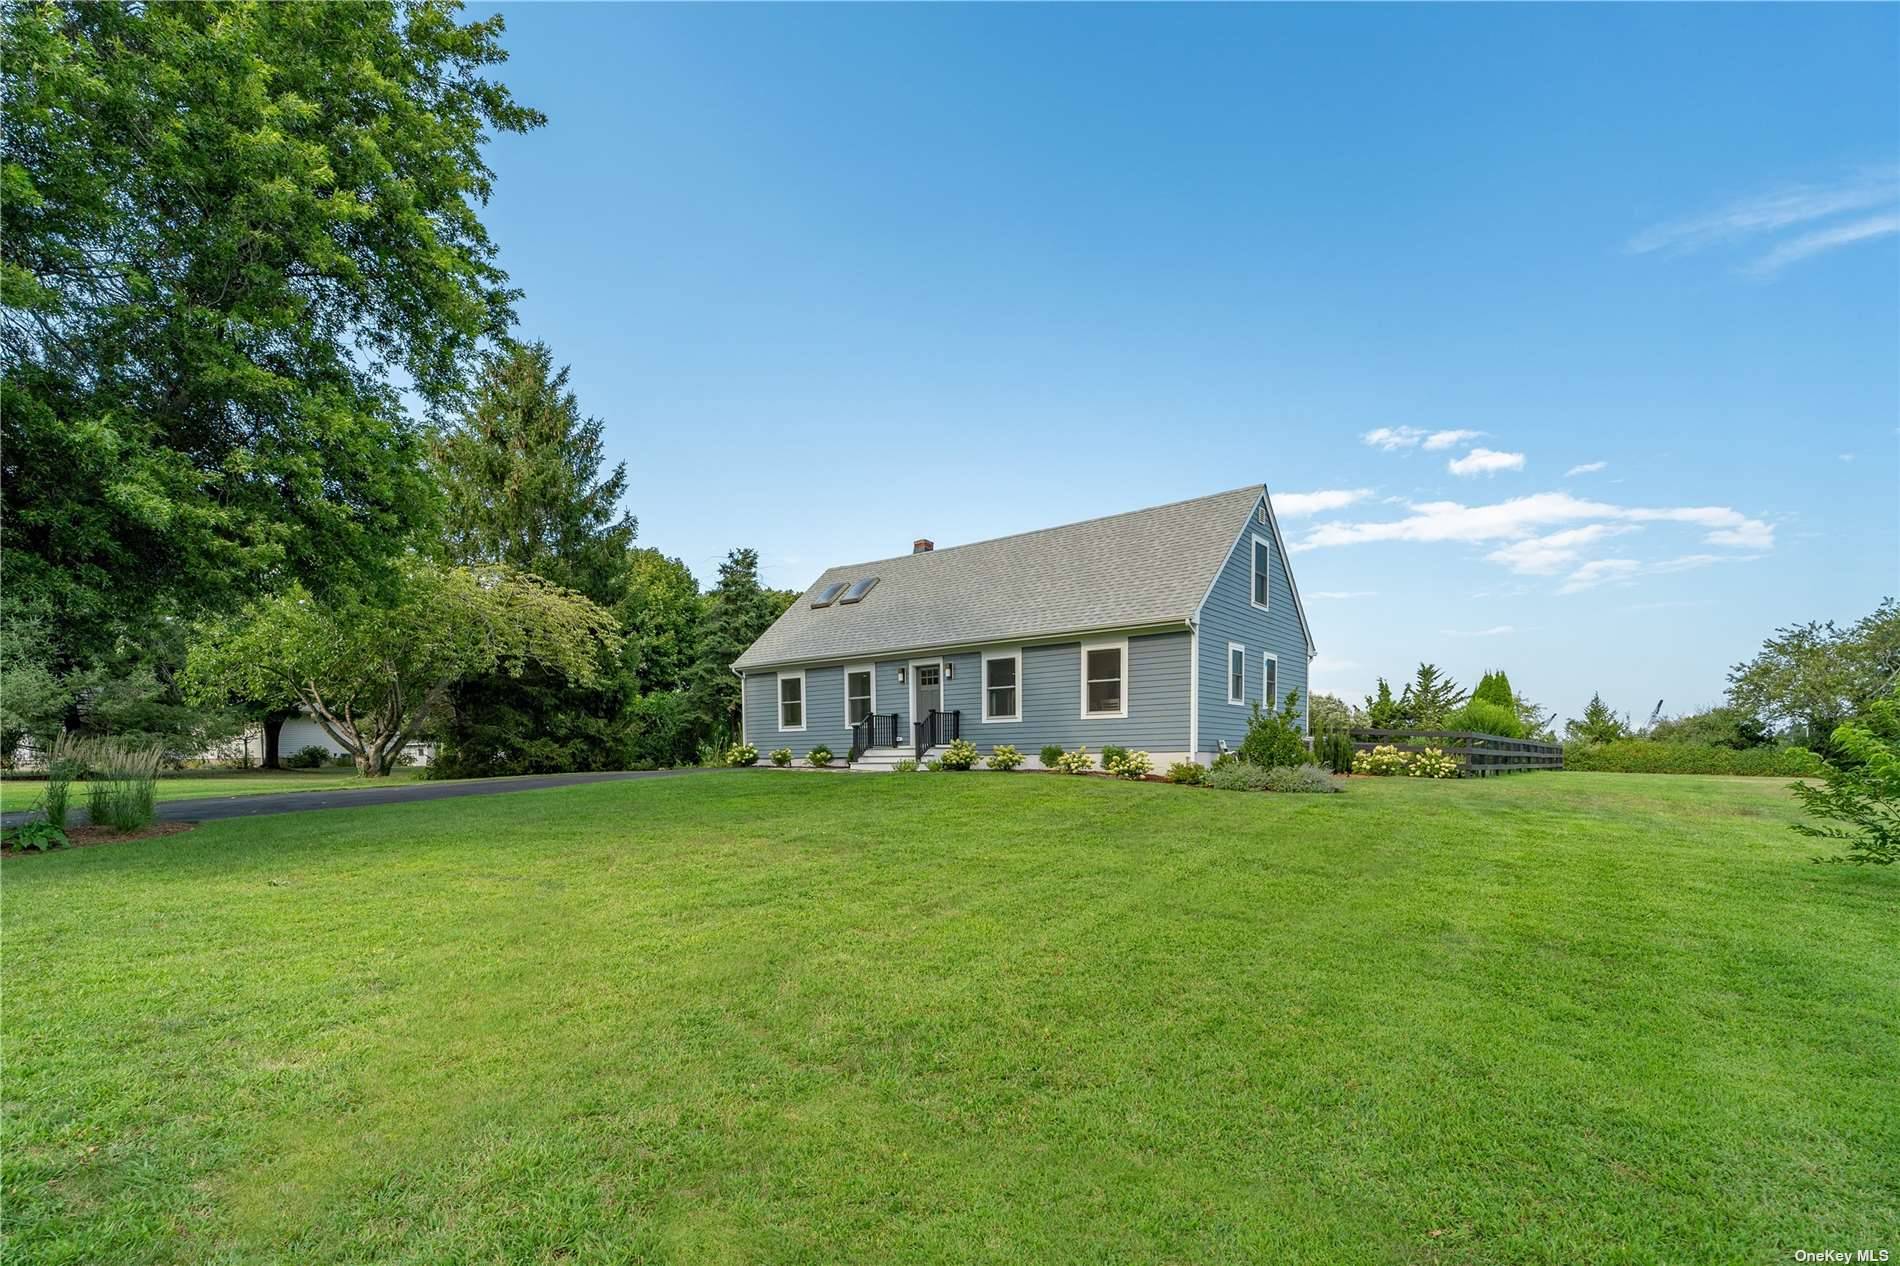 Picture yourself living in the midst of the sprawling farms of the North Fork on nearly an acre in the desirable hamlet of Cutchogue.